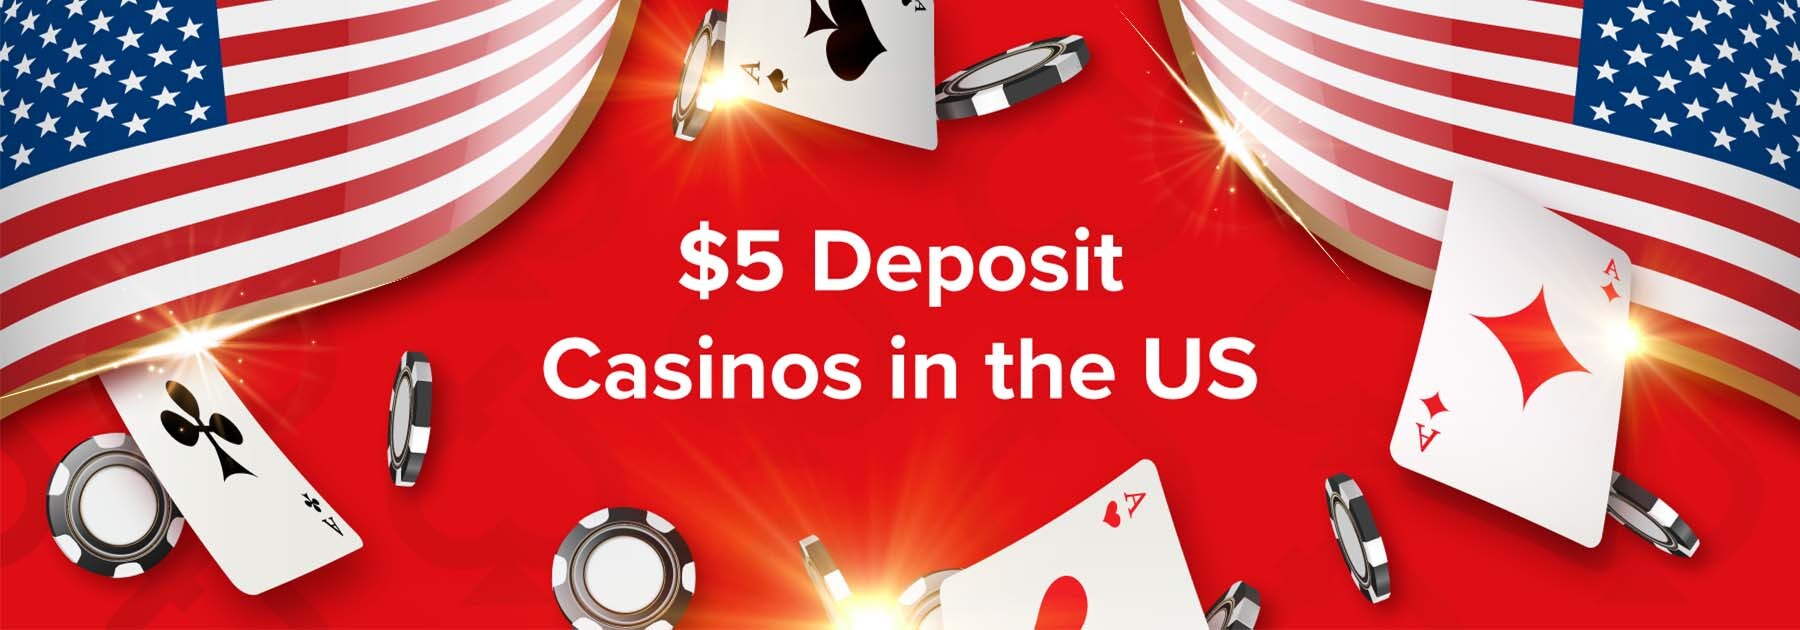 I Don't Want To Spend This Much Time On casinos. How About You?